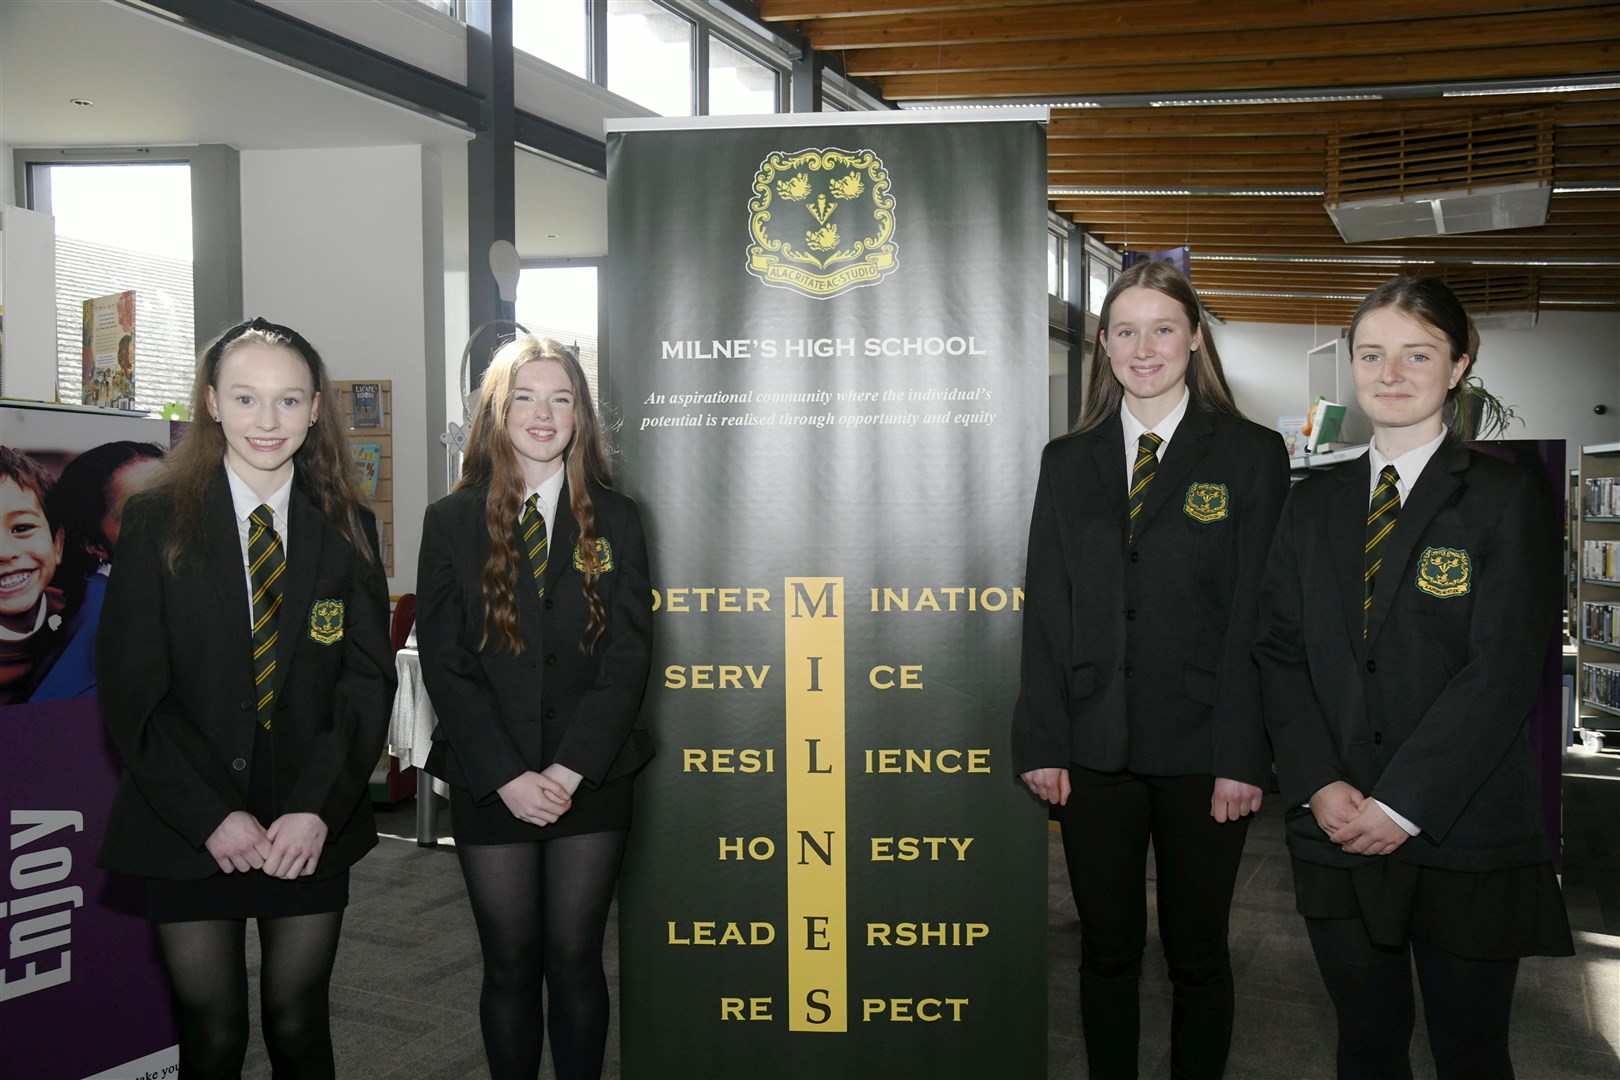 Nat 5 result record breaker Hebe Muckle (right) is joined by classmates Eva Melrose (let), Ellie Thomson-Bialy (second left) and Eilidh Hay in celebrating their exam results. Picture: Beth Taylor